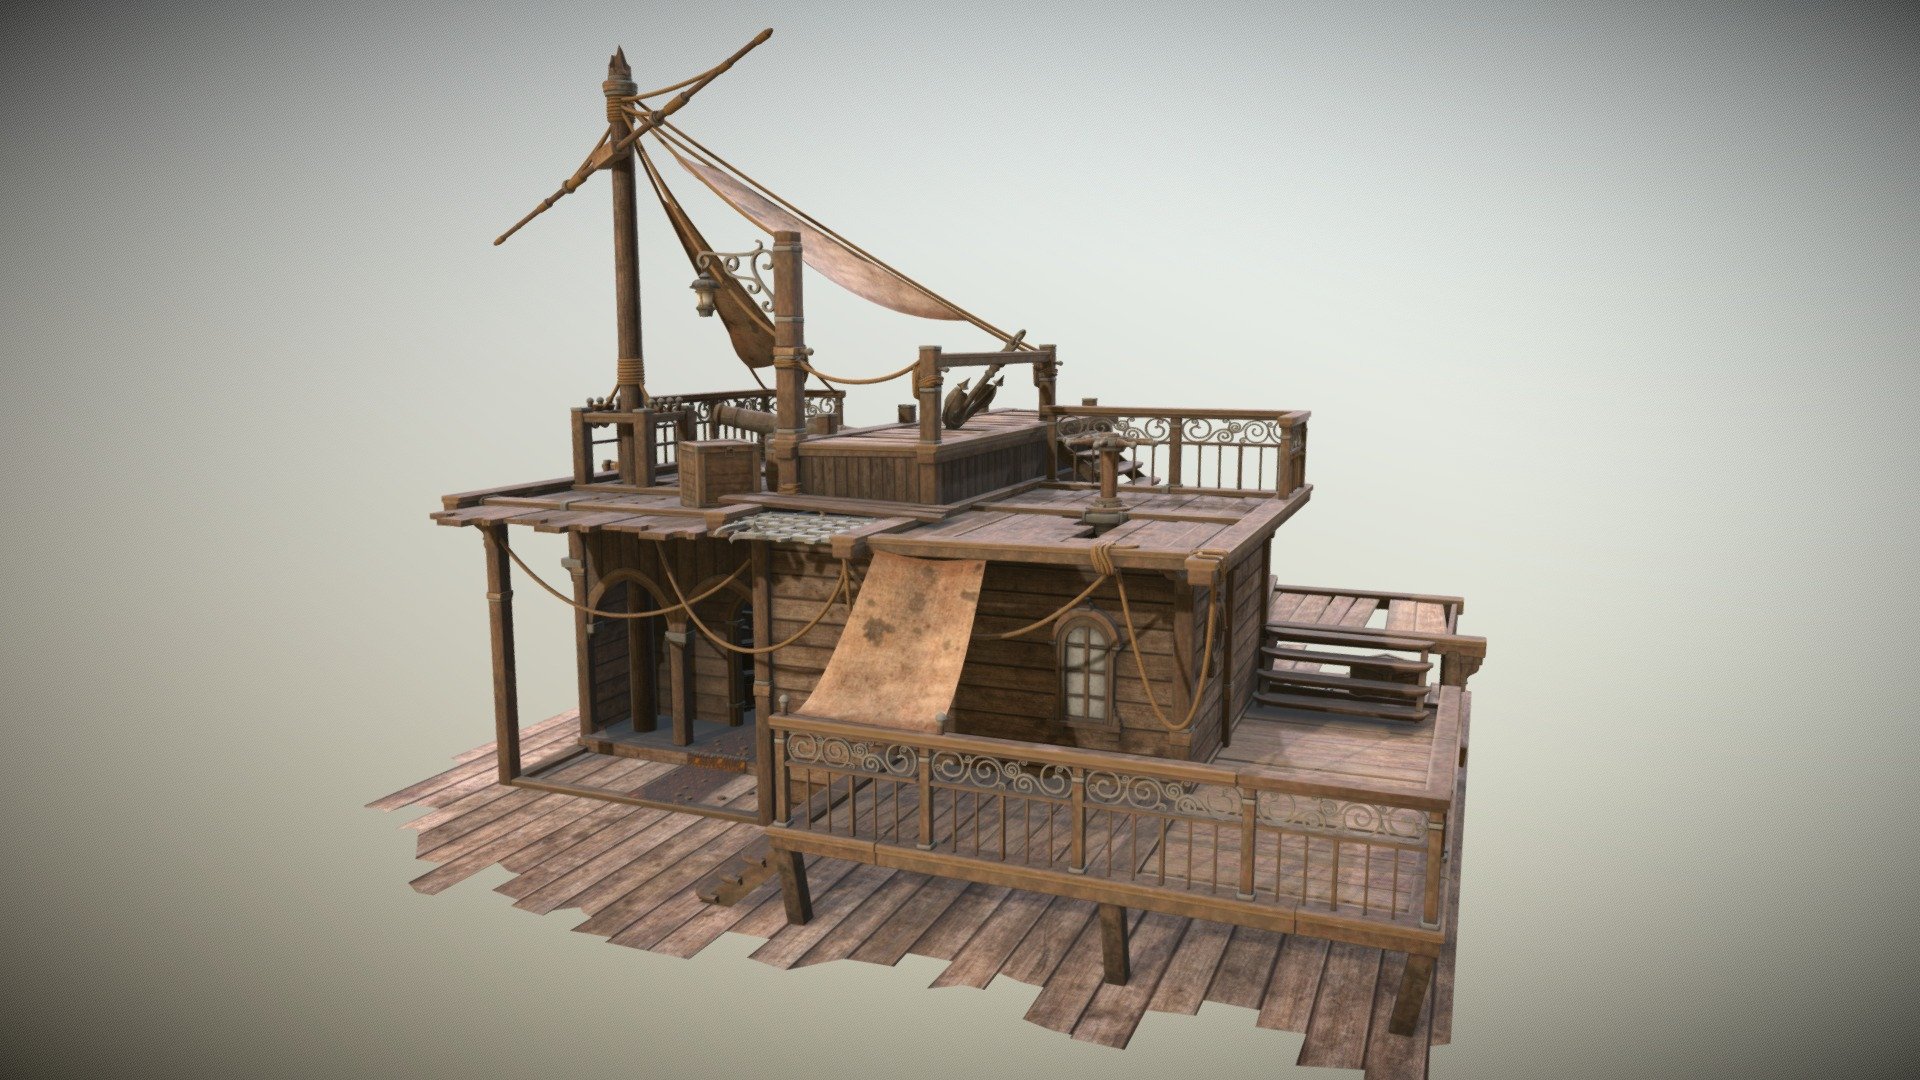 This model was baked. There is no way for me to fix the UV mapping as I do not have the source files anymore. This means that this model can't be easily retextured! However all the props that were used for this scene are available in the asset pack Harbour Pack on the UE4 marketplace.

Wooden house made of old ship parts, stylized and fantasy scene uses simplified, baked models.

my website:
https://conradjustin.com/portfolio/

my twitter:
https://twitter.com/ConradJustinArt

my Artstation:
https://www.artstation.com/conradjustin - Shipwreck turned into hideout - Download Free 3D model by Conrad Justin (@ConradJustin) 3d model